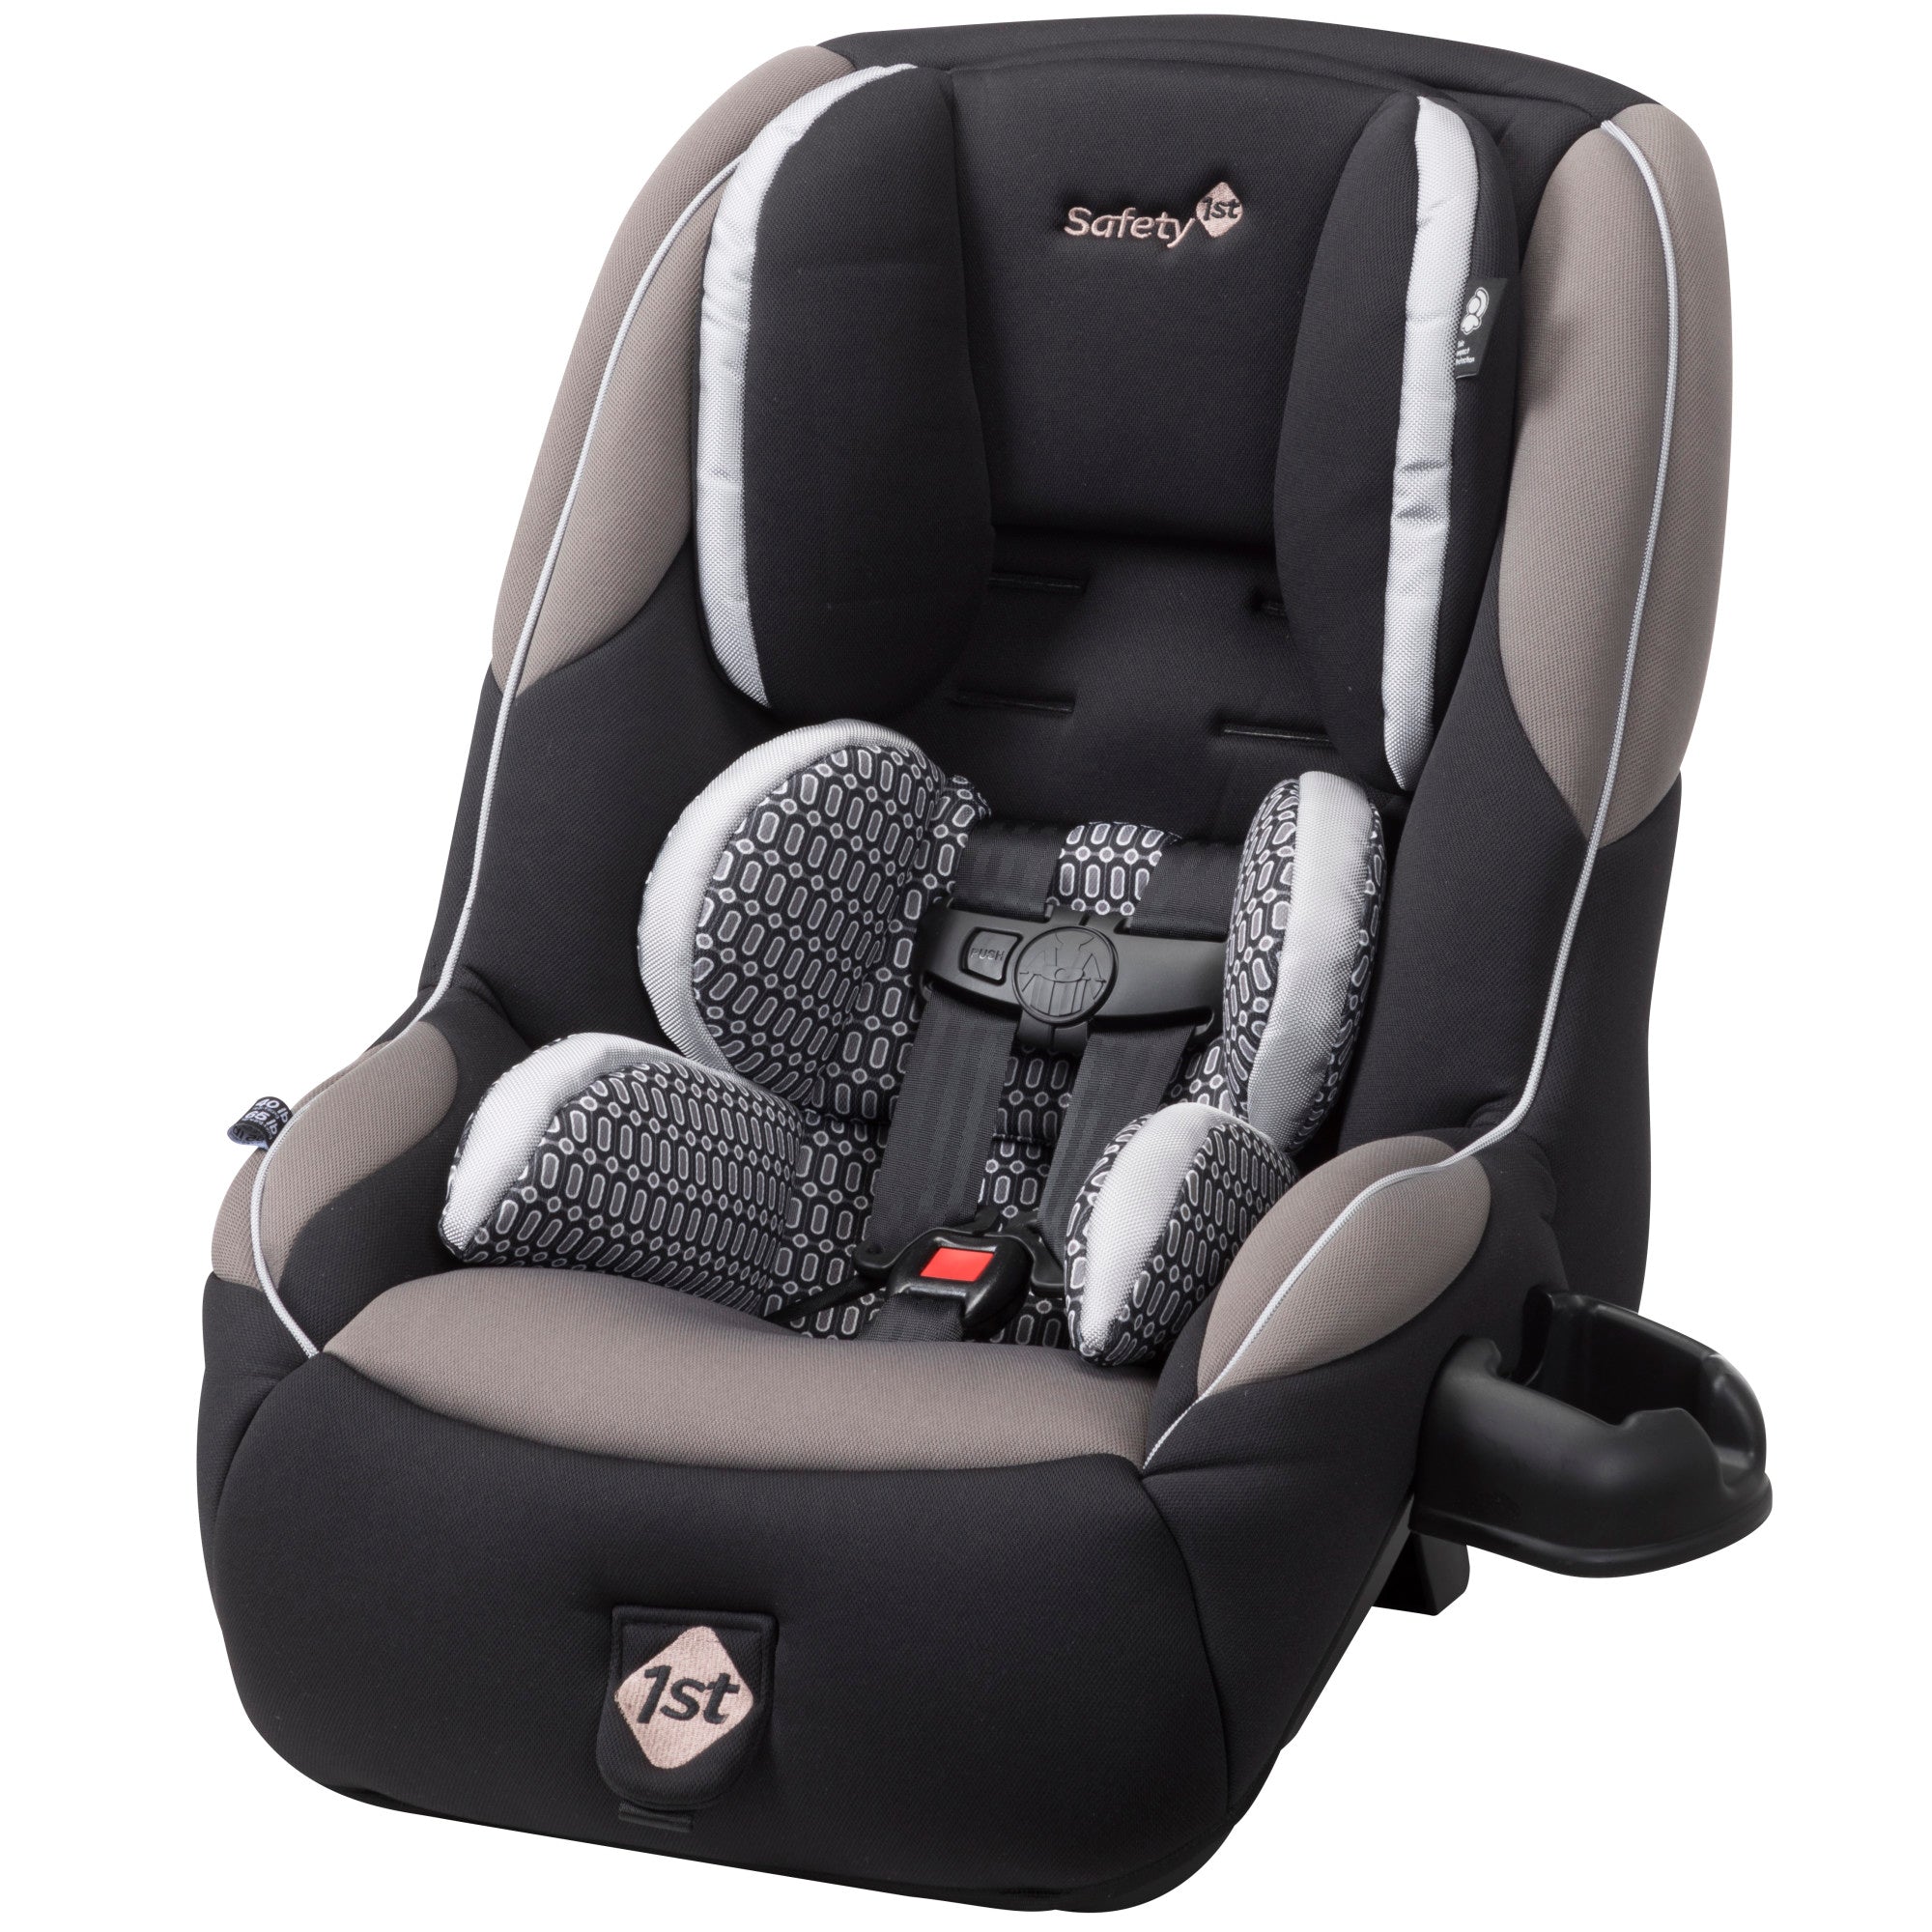 Guide 65 2-in-1 Convertible Car Seat - Chambers